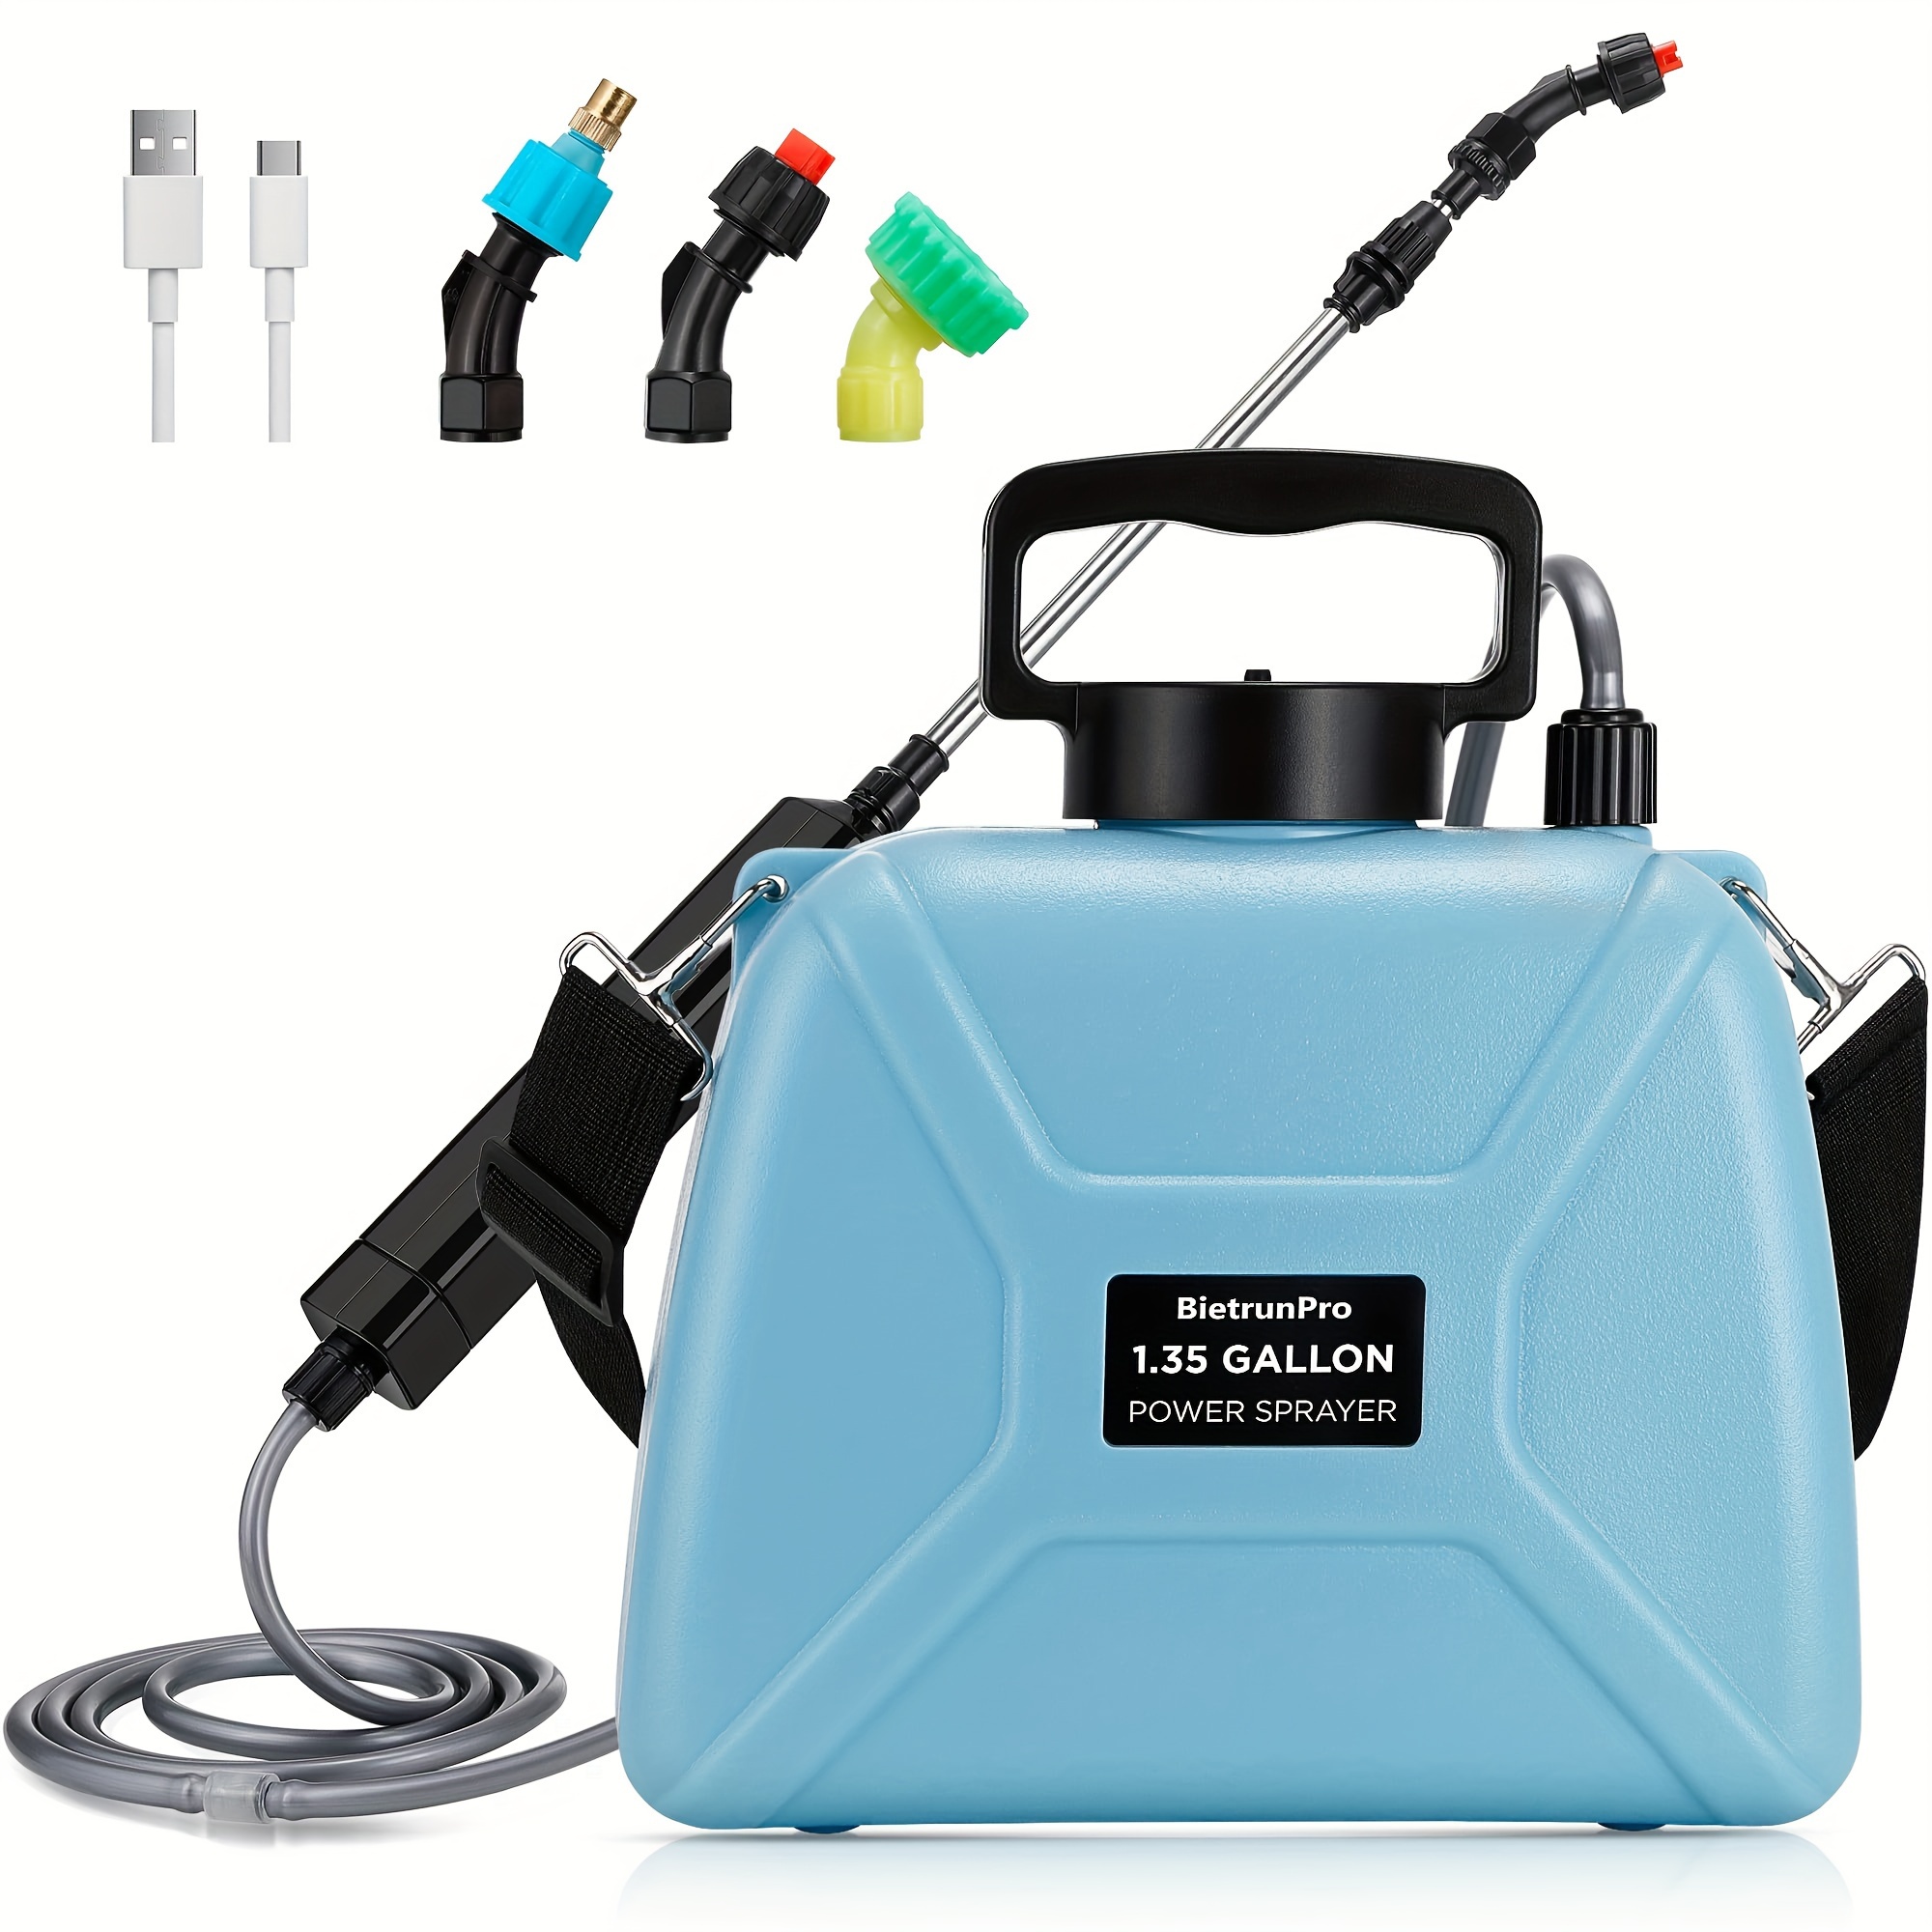 

Bietrun Electric Sprayer 1.35 Gallon, Sprayers In Lawn And Garden, Battery Powered Sprayer With 3 Mist Nozzles, Max To 3h Working Time, Rechargeable Sprayer For Lawn, Garden, Cleaning